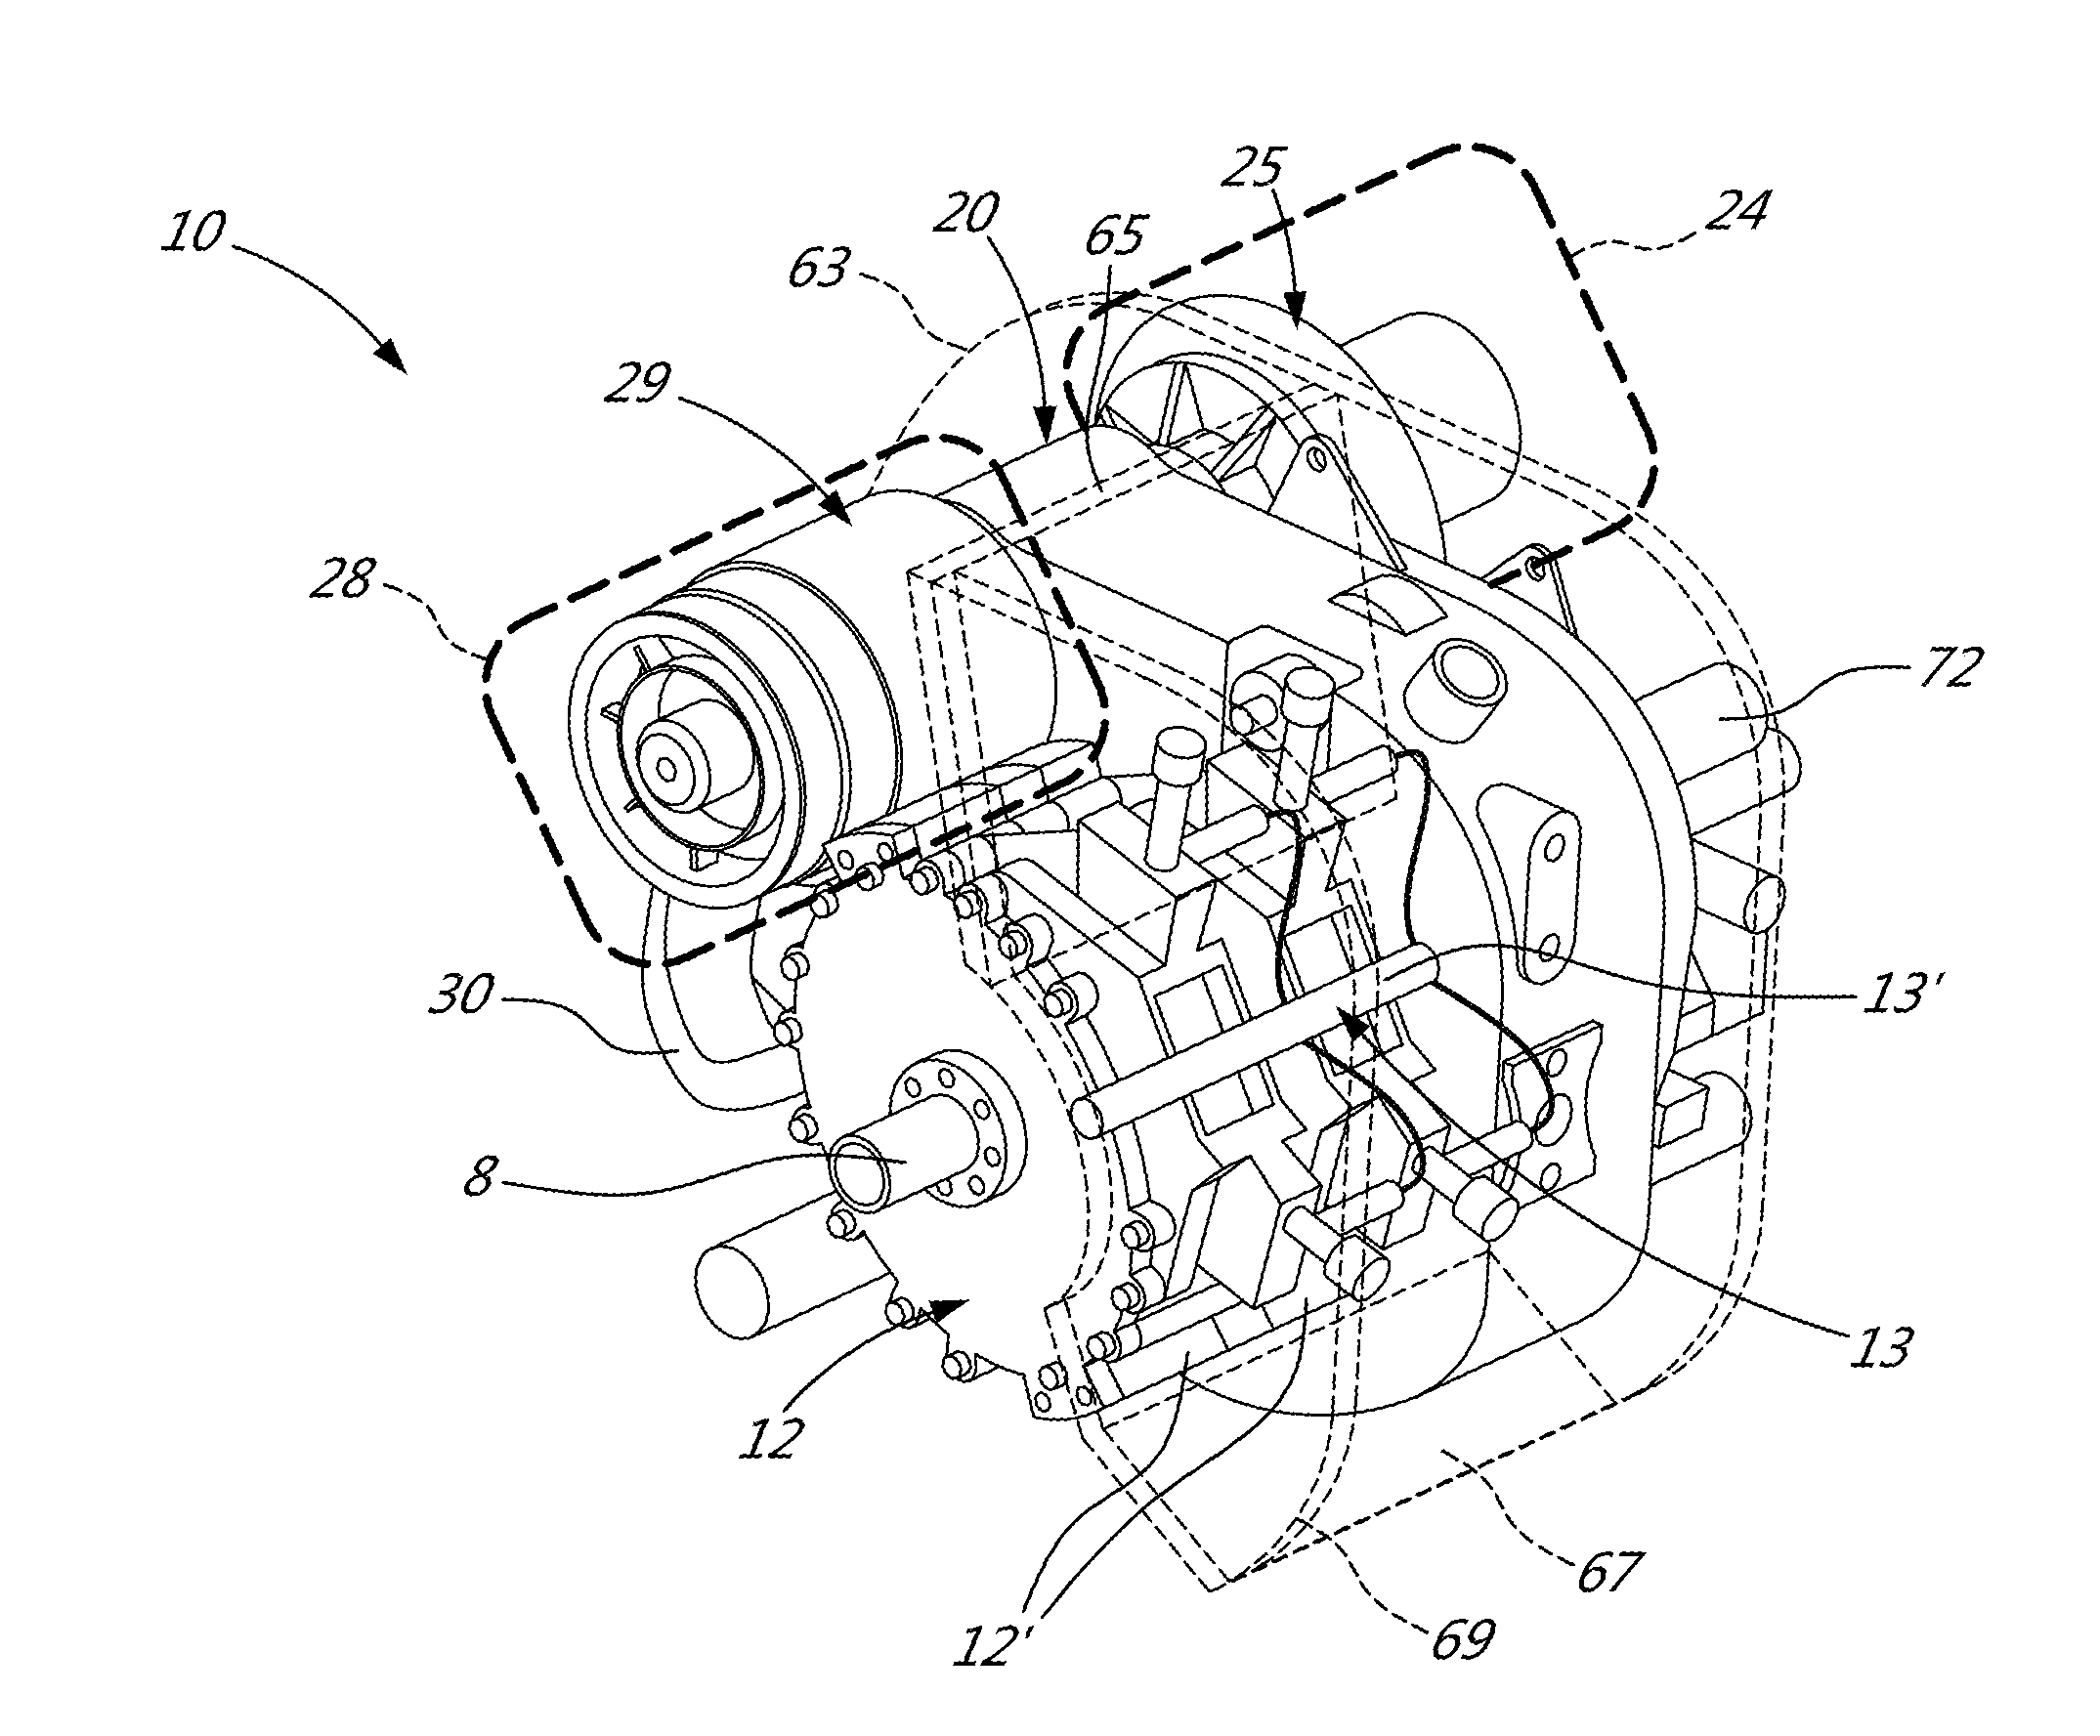 Compound engine assembly with confined fire zone